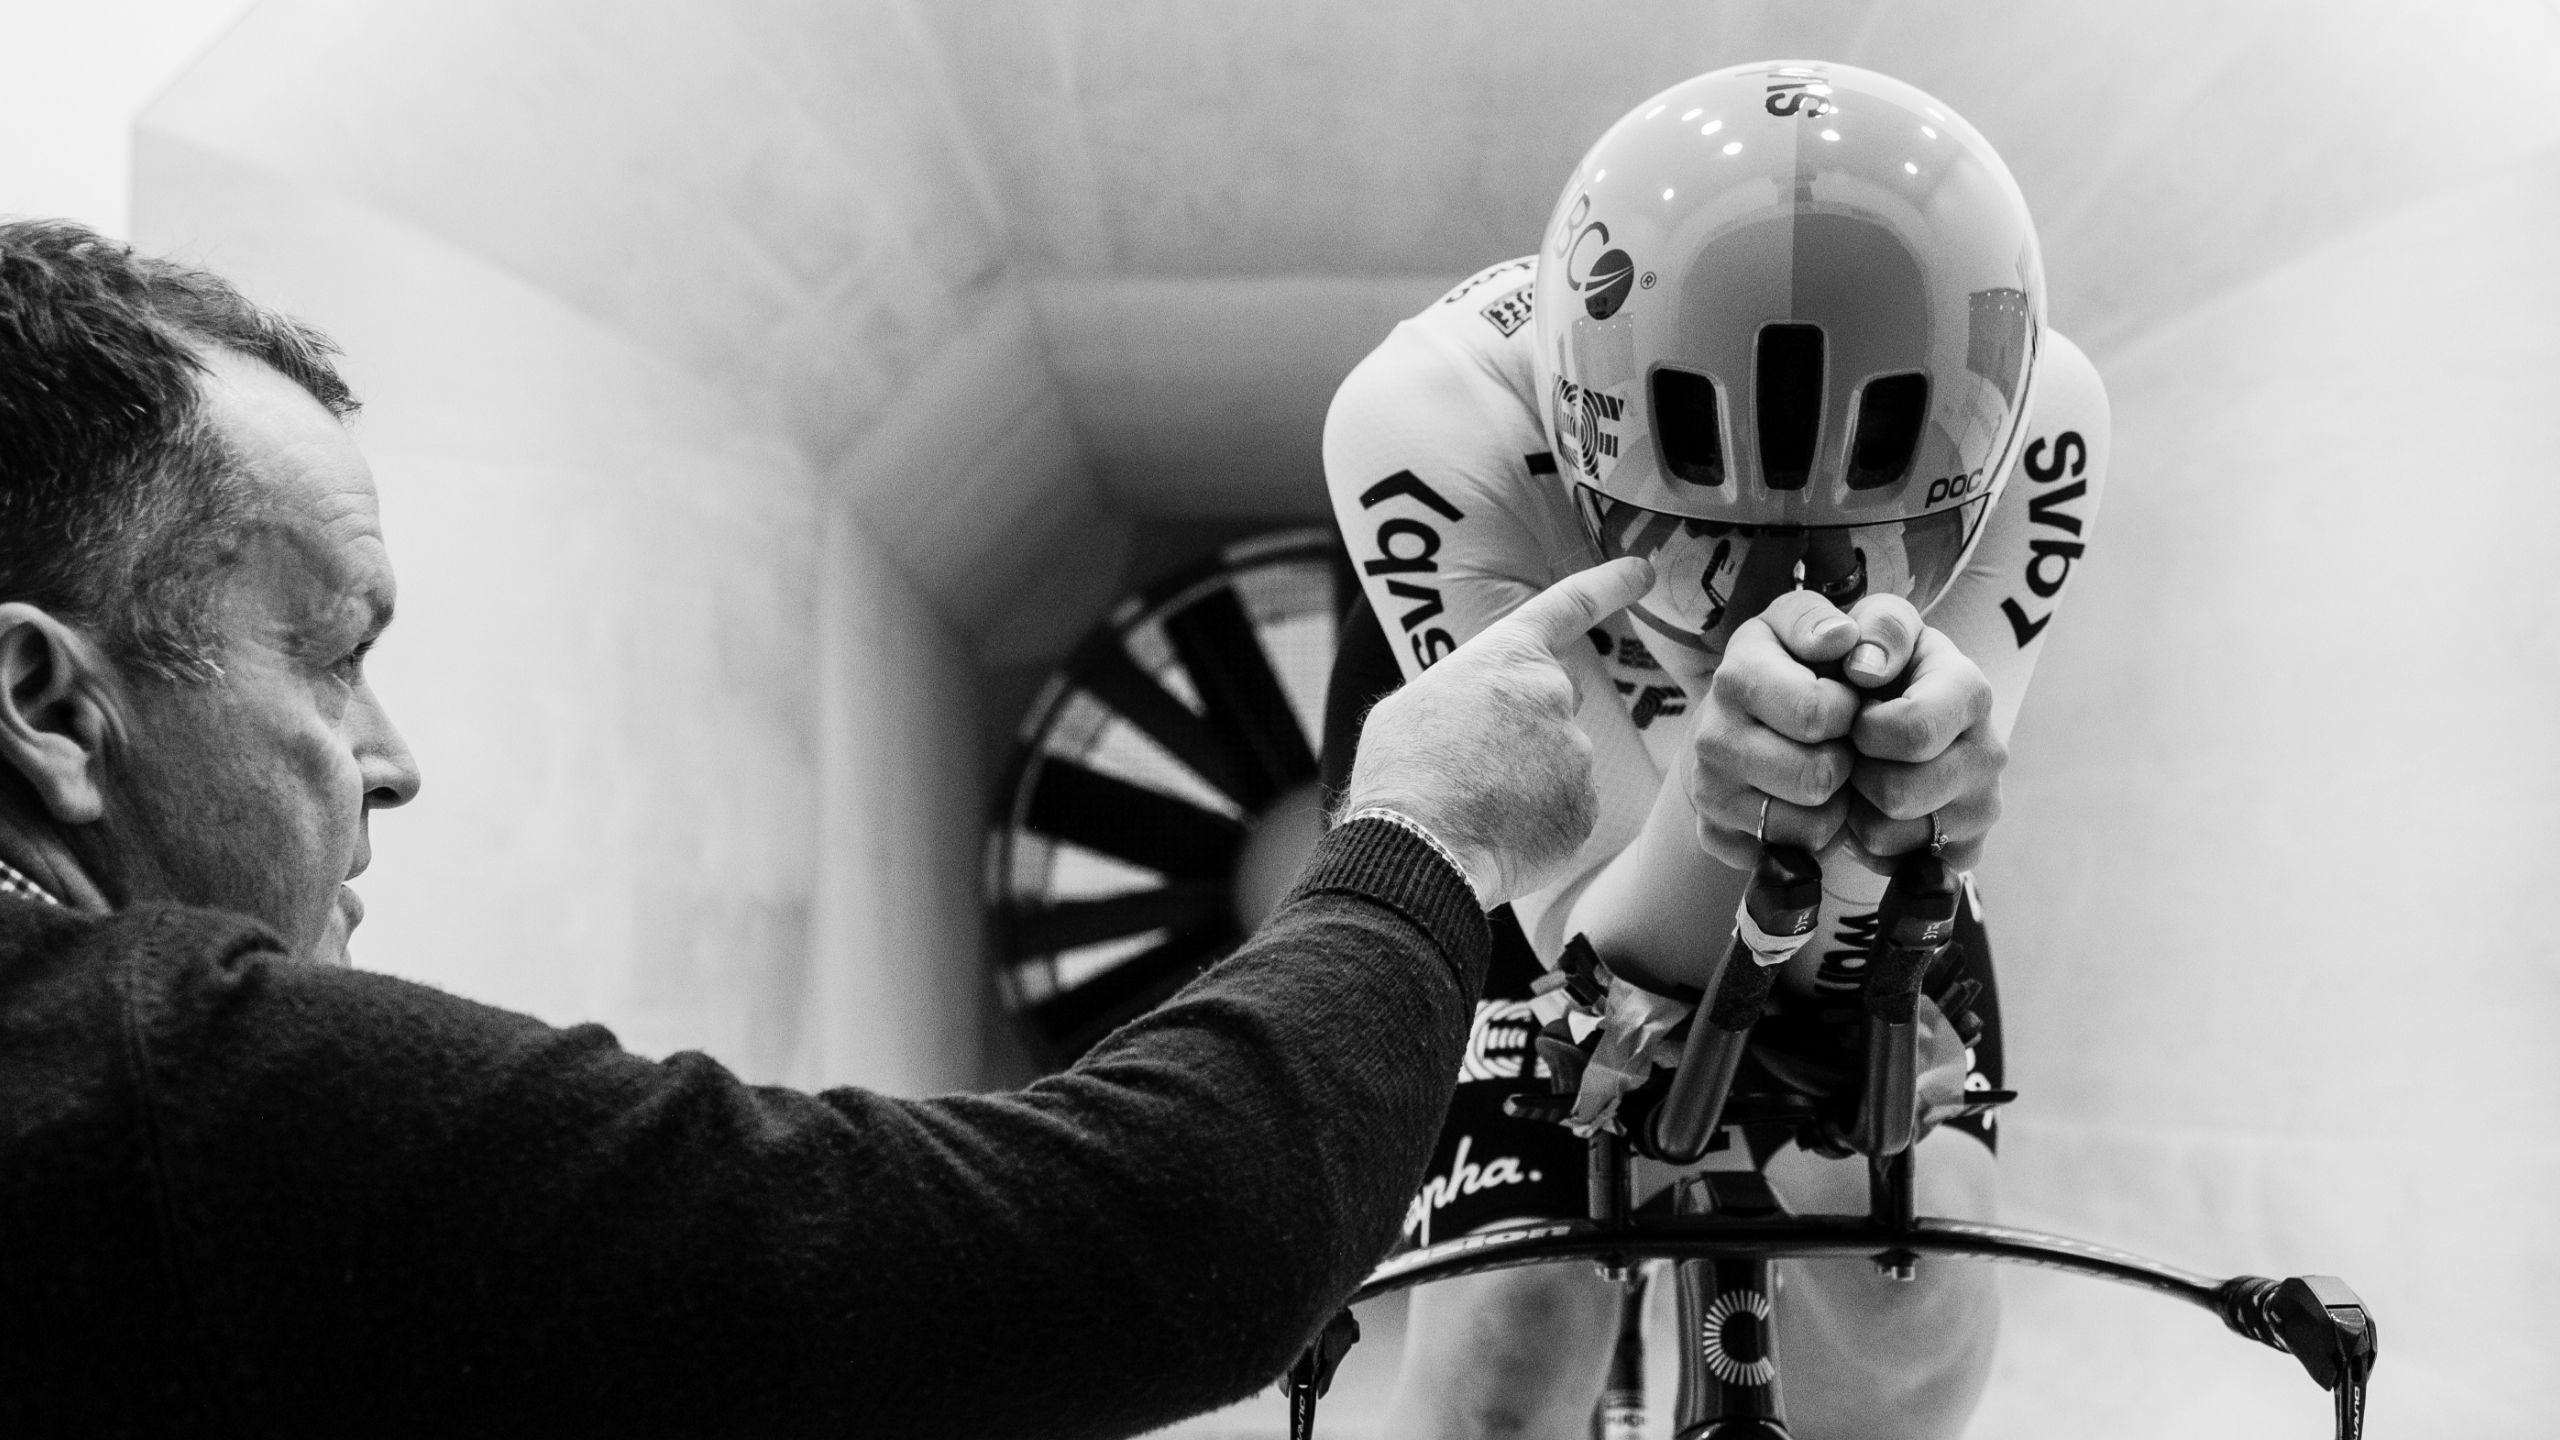 Image of EF rider testing Procen in windtunnel